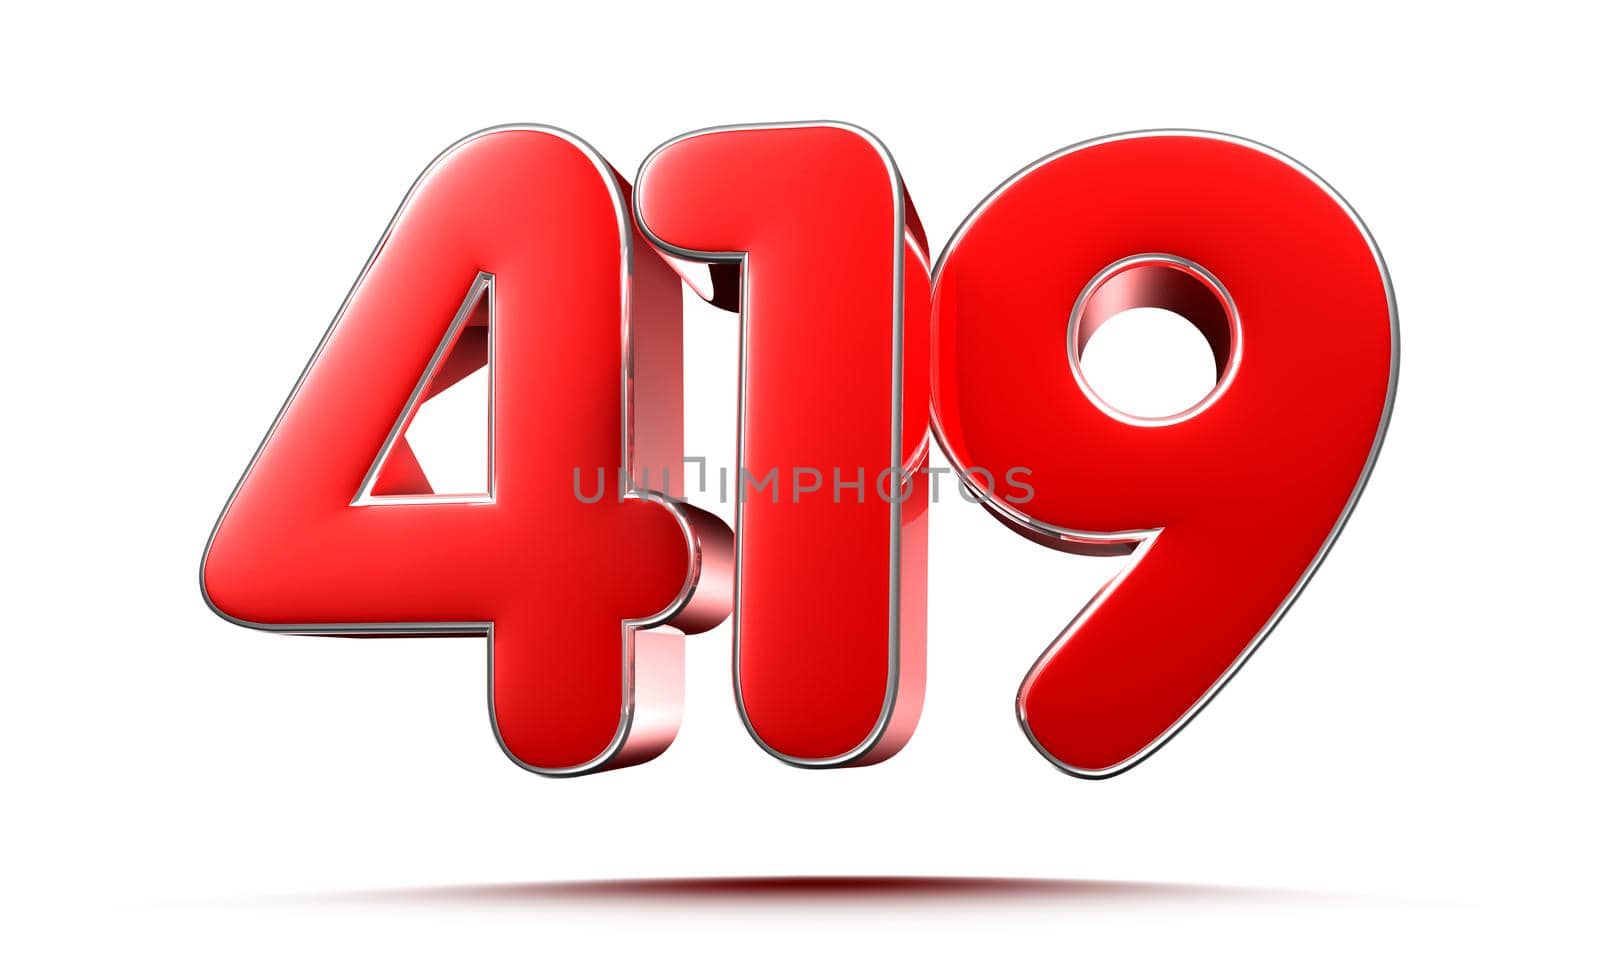 Rounded red numbers 419 on white background 3D illustration with clipping path by thitimontoyai